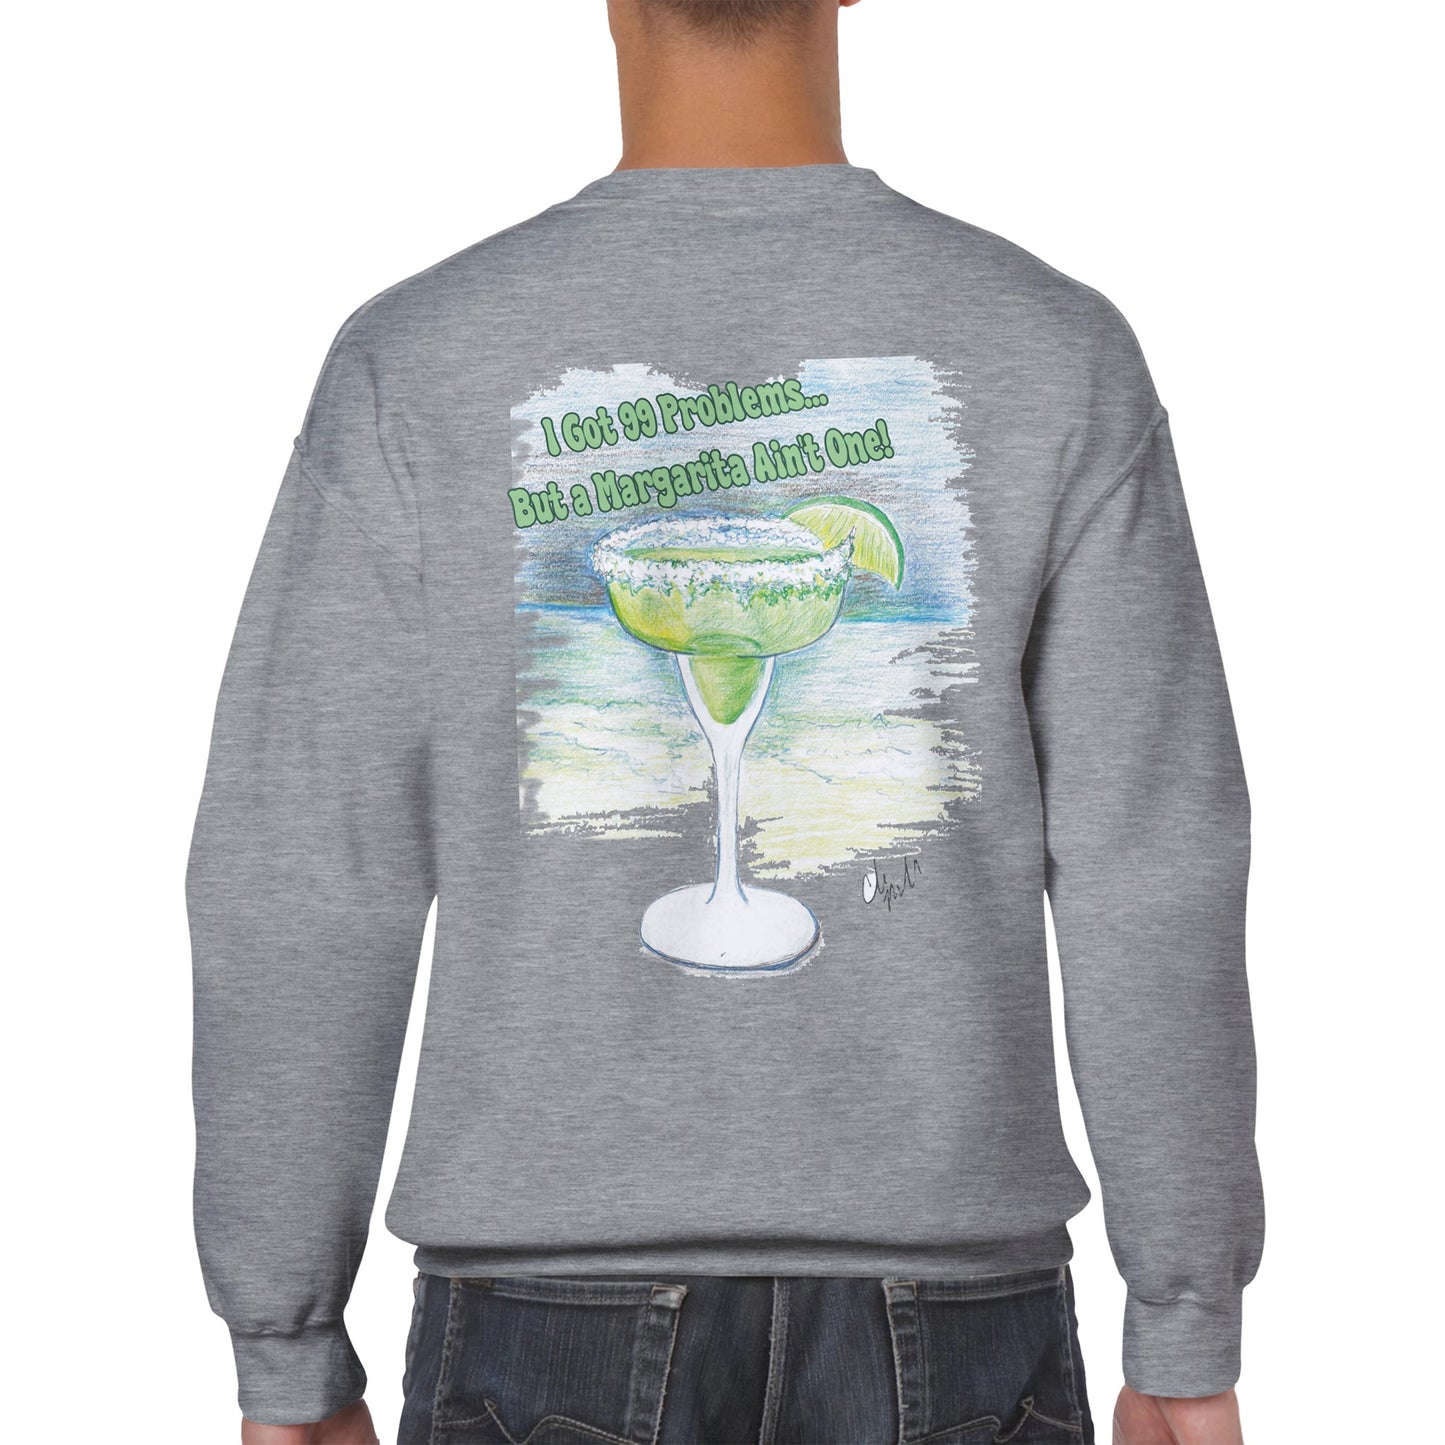 A grey Classic Unisex Crewneck sweatshirt with original artwork and motto I Got 99 Problems But a Margarita Ain’t One on back and Whatya Say logo on front from WhatYa Say Apparel a rear view of short haired male model.